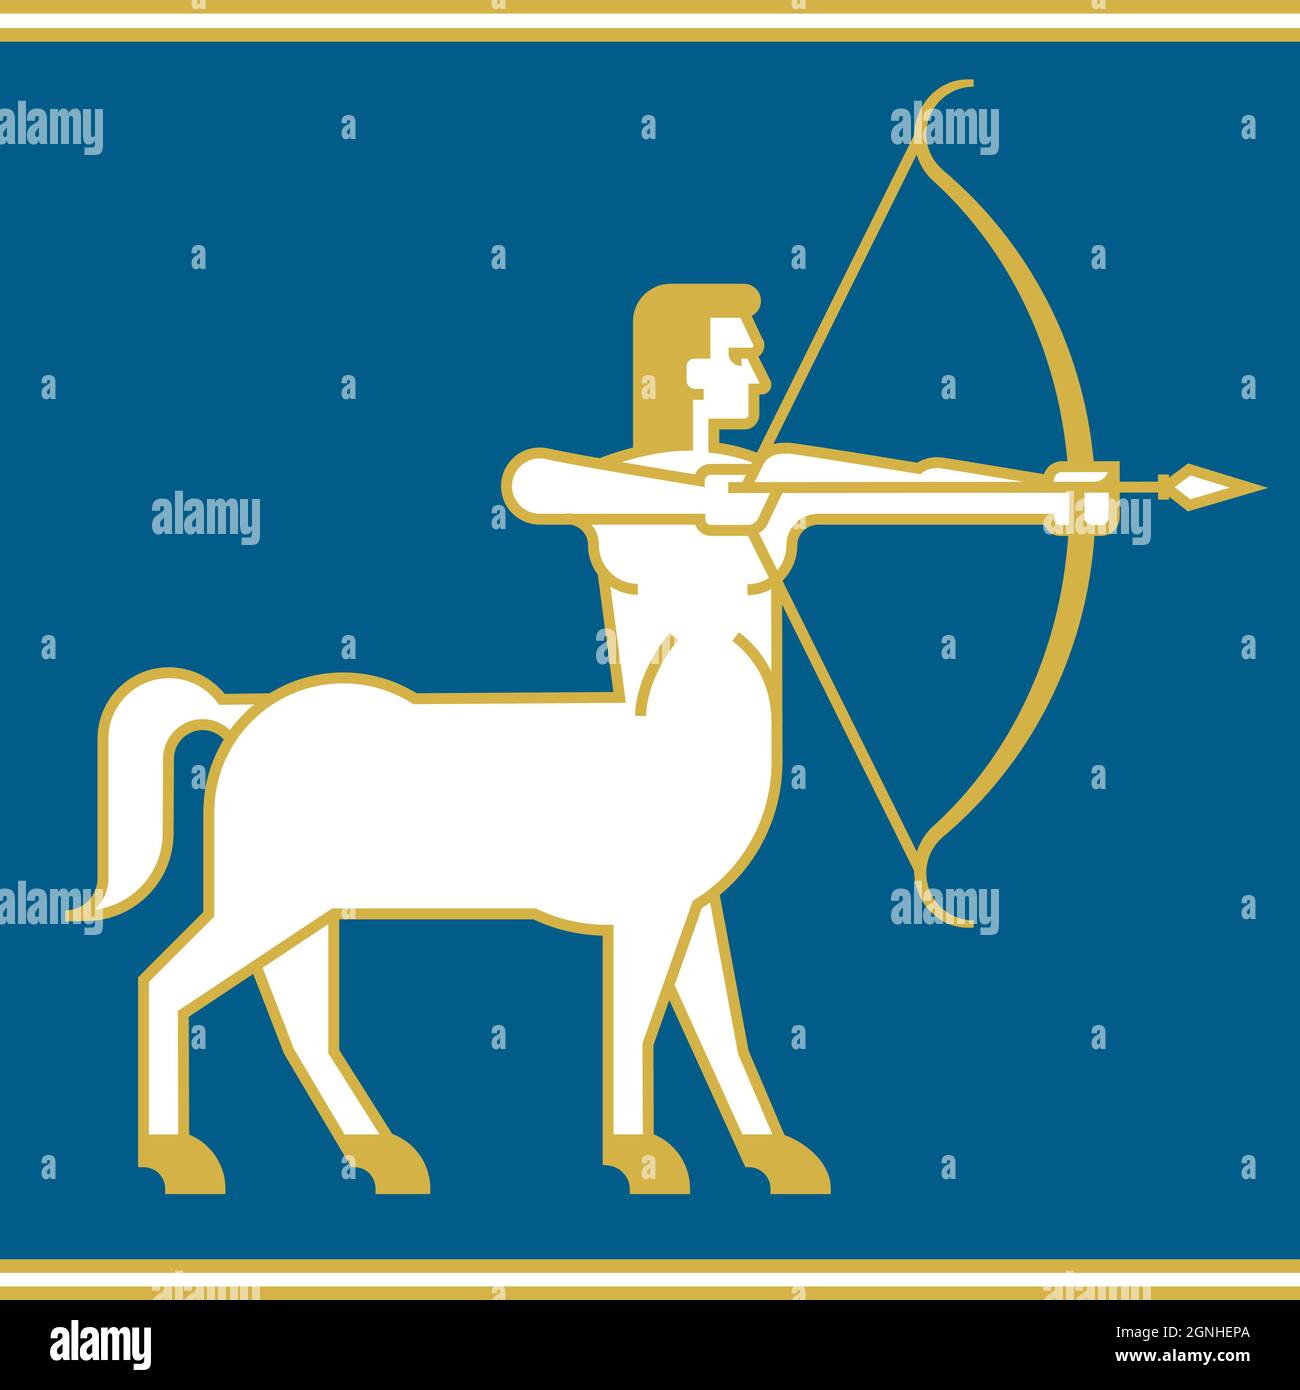 Centaur or Sagittarius Archer vector illustration. Half man, half horse with bow and arrow simplified drawing with heavy outline. Stock Vector